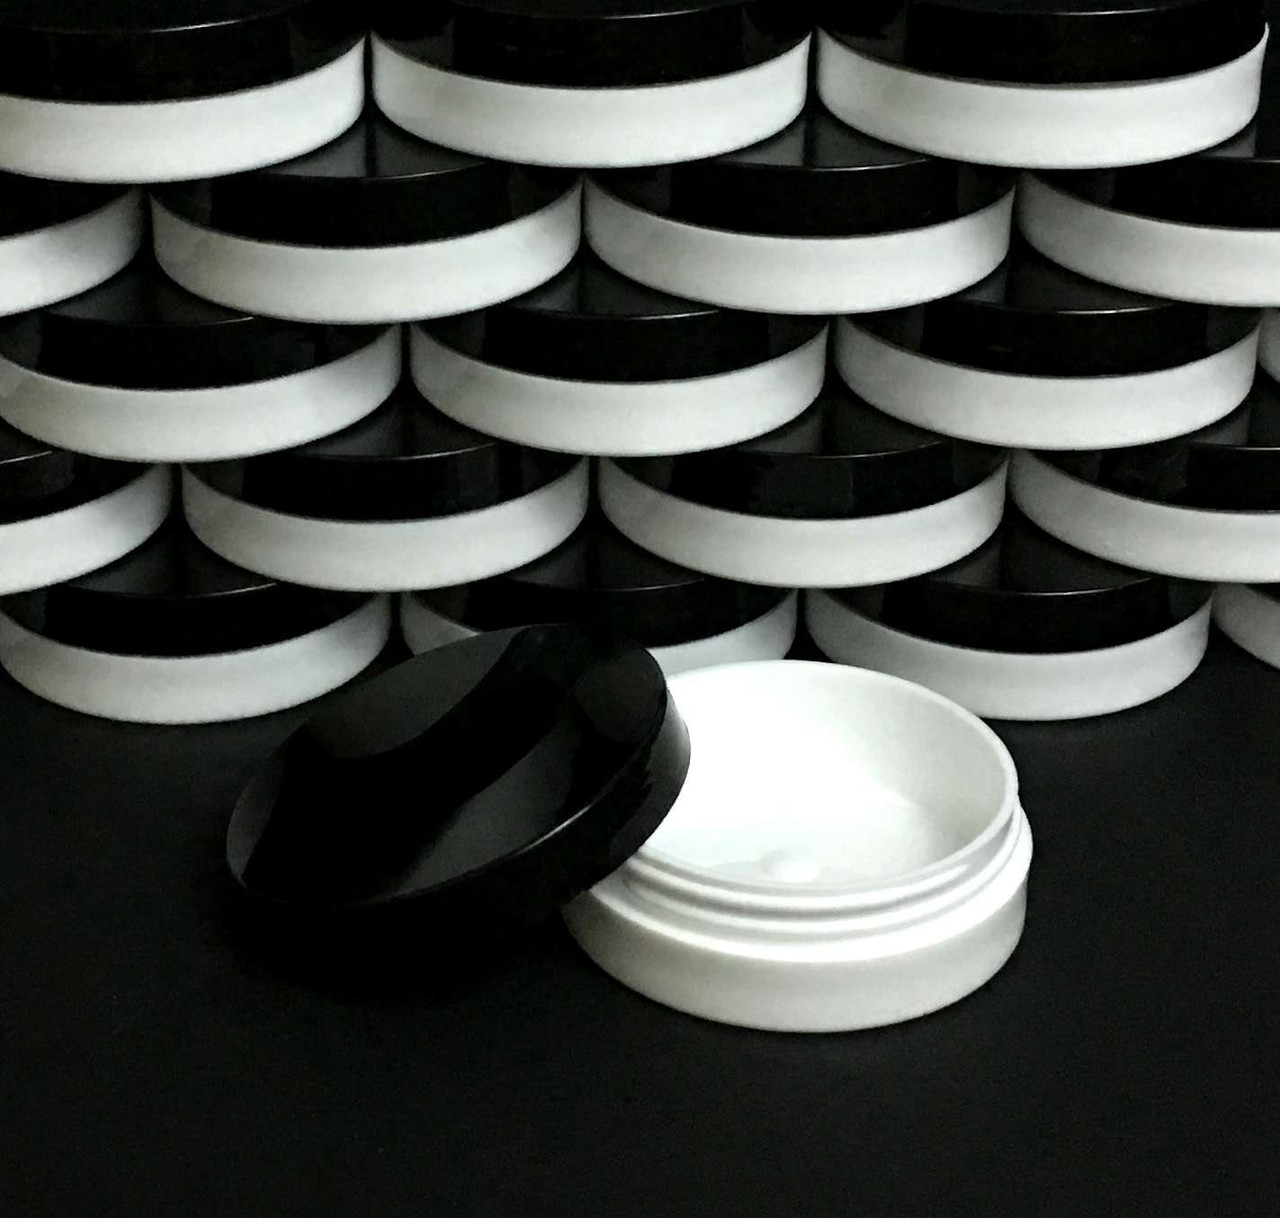 https://cdn11.bigcommerce.com/s-qd7k5gxi/images/stencil/1280x1280/products/481/7138/Plastic-Cosmetic-Containers-Low-Profile-Wide-Mouth-White-Jars-with-Lids-1-oz-White-Black-Cap-9351-9352-Beauty-Makeup-Supply_6346__88810.1661390821.jpg?c=2?imbypass=on